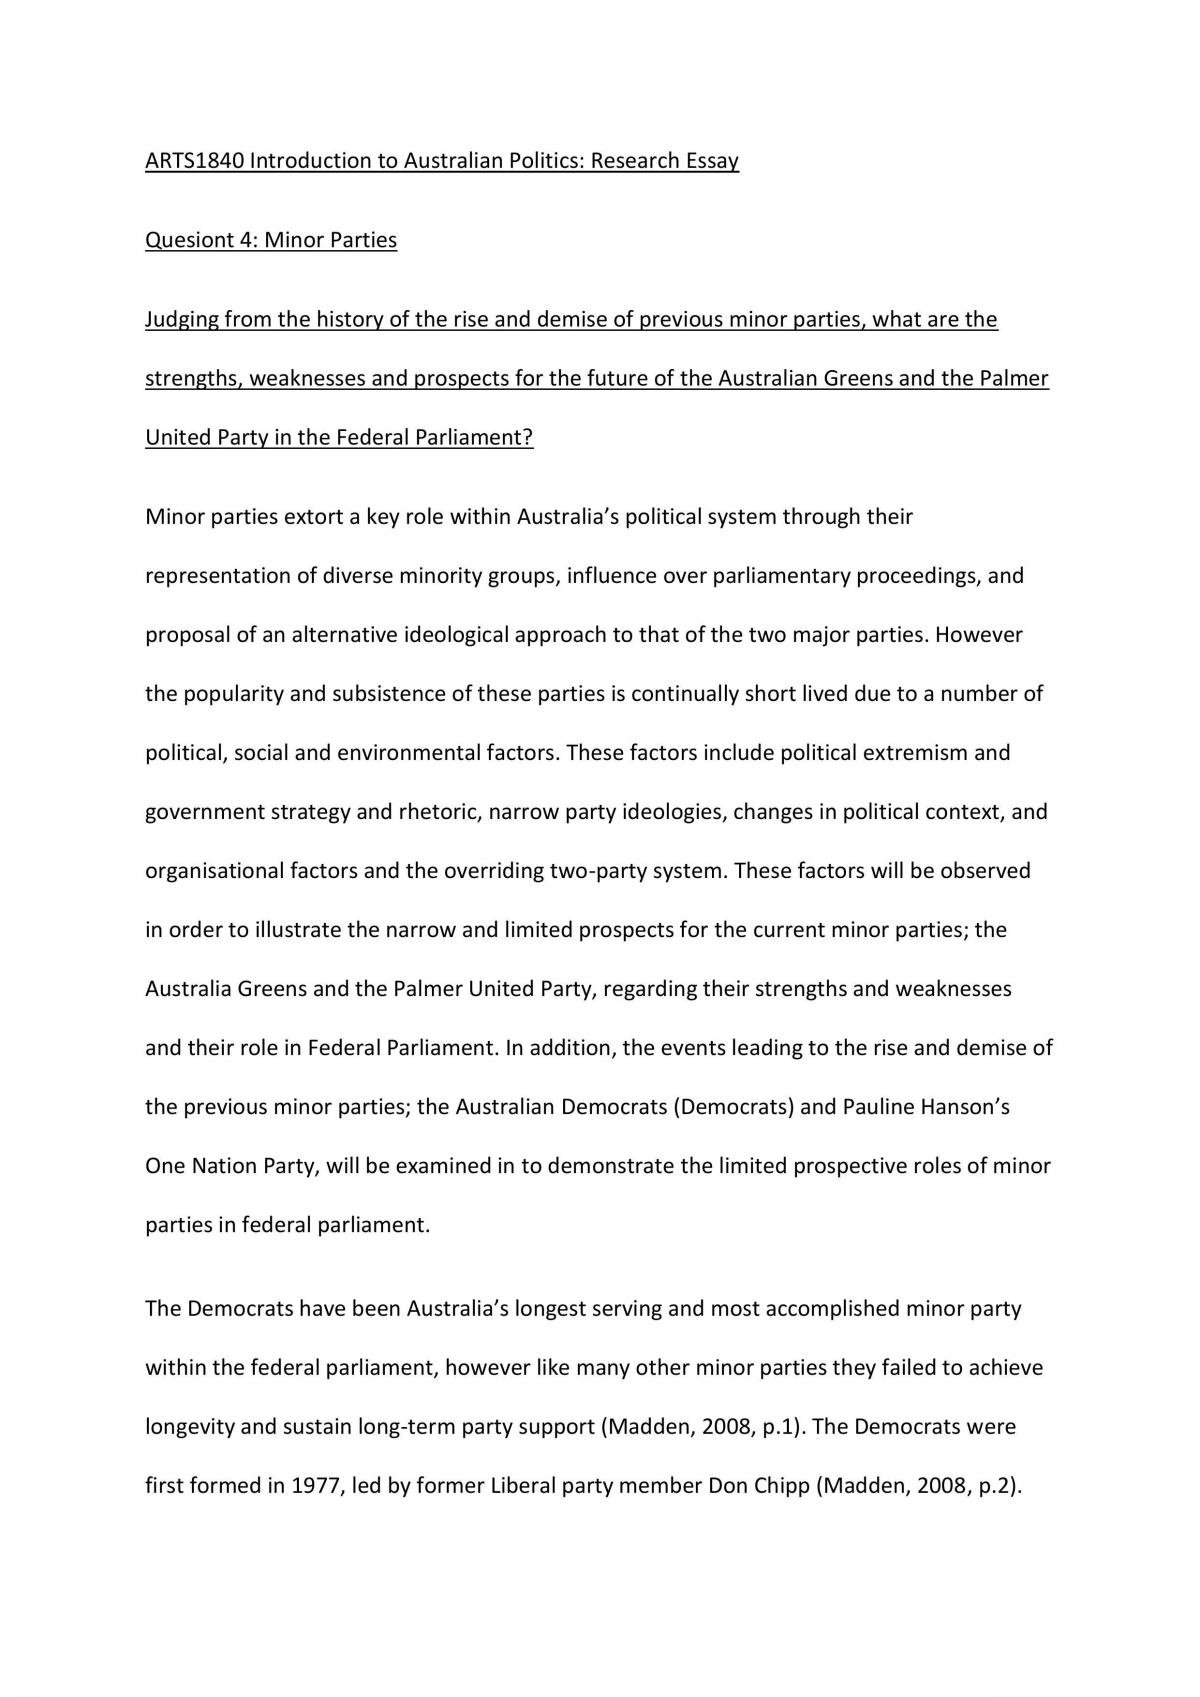 Essay on the Rise and Demisce of Minor Parties - Page 1